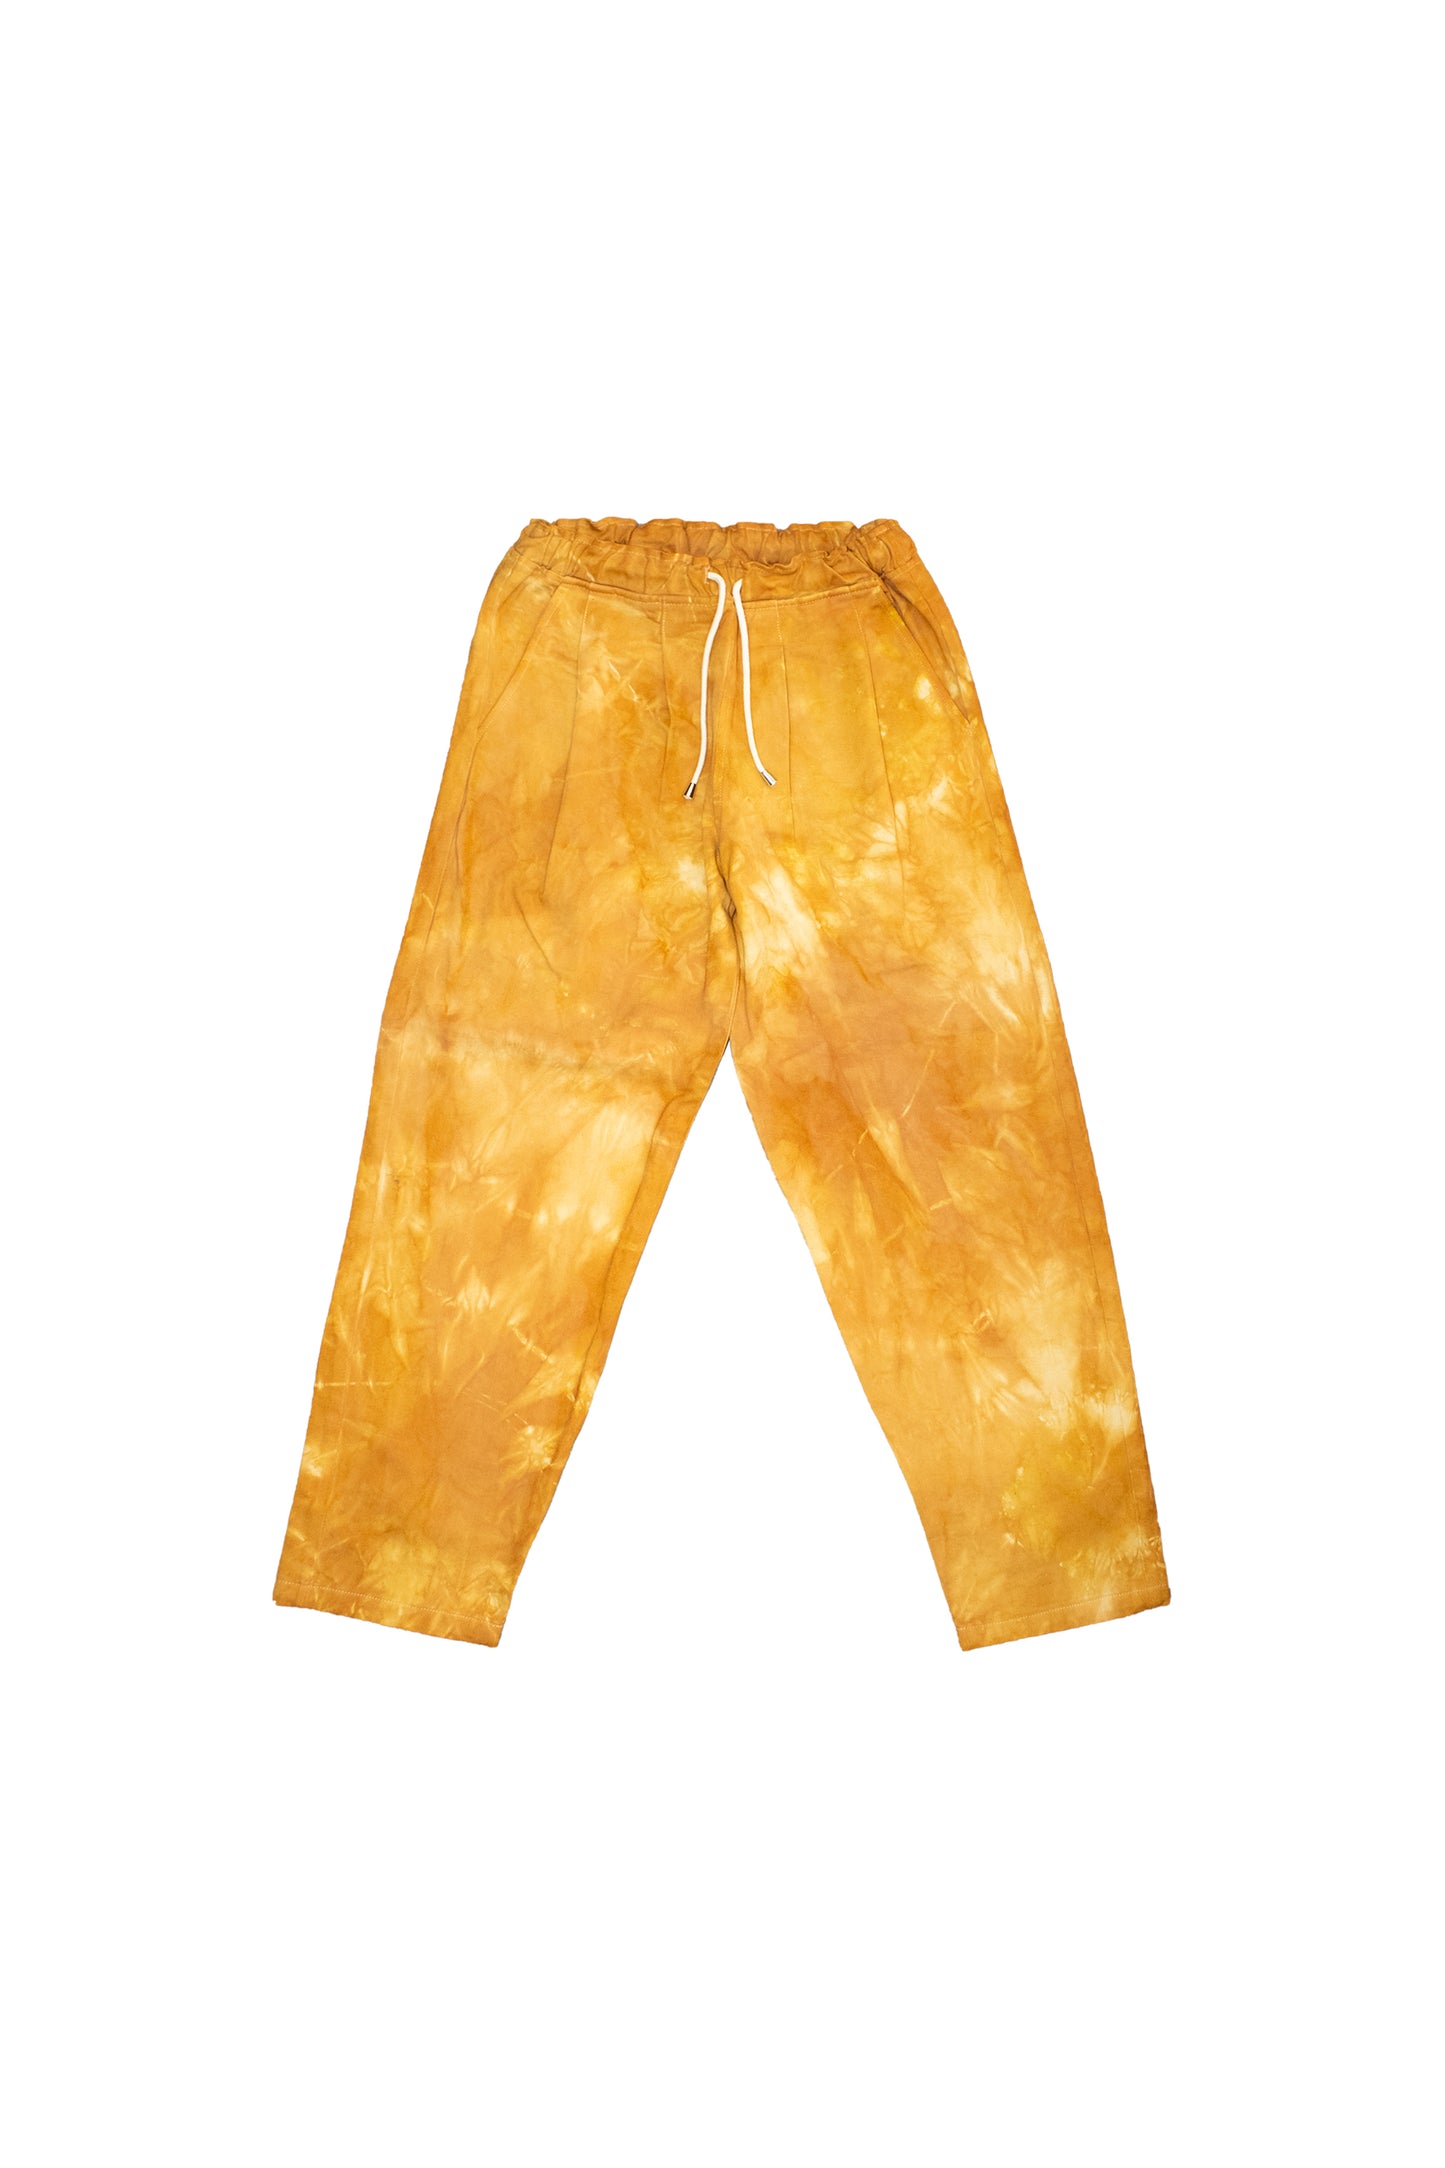 FRAICHE X NORTH HILL - STONE DYED CARROT PANT